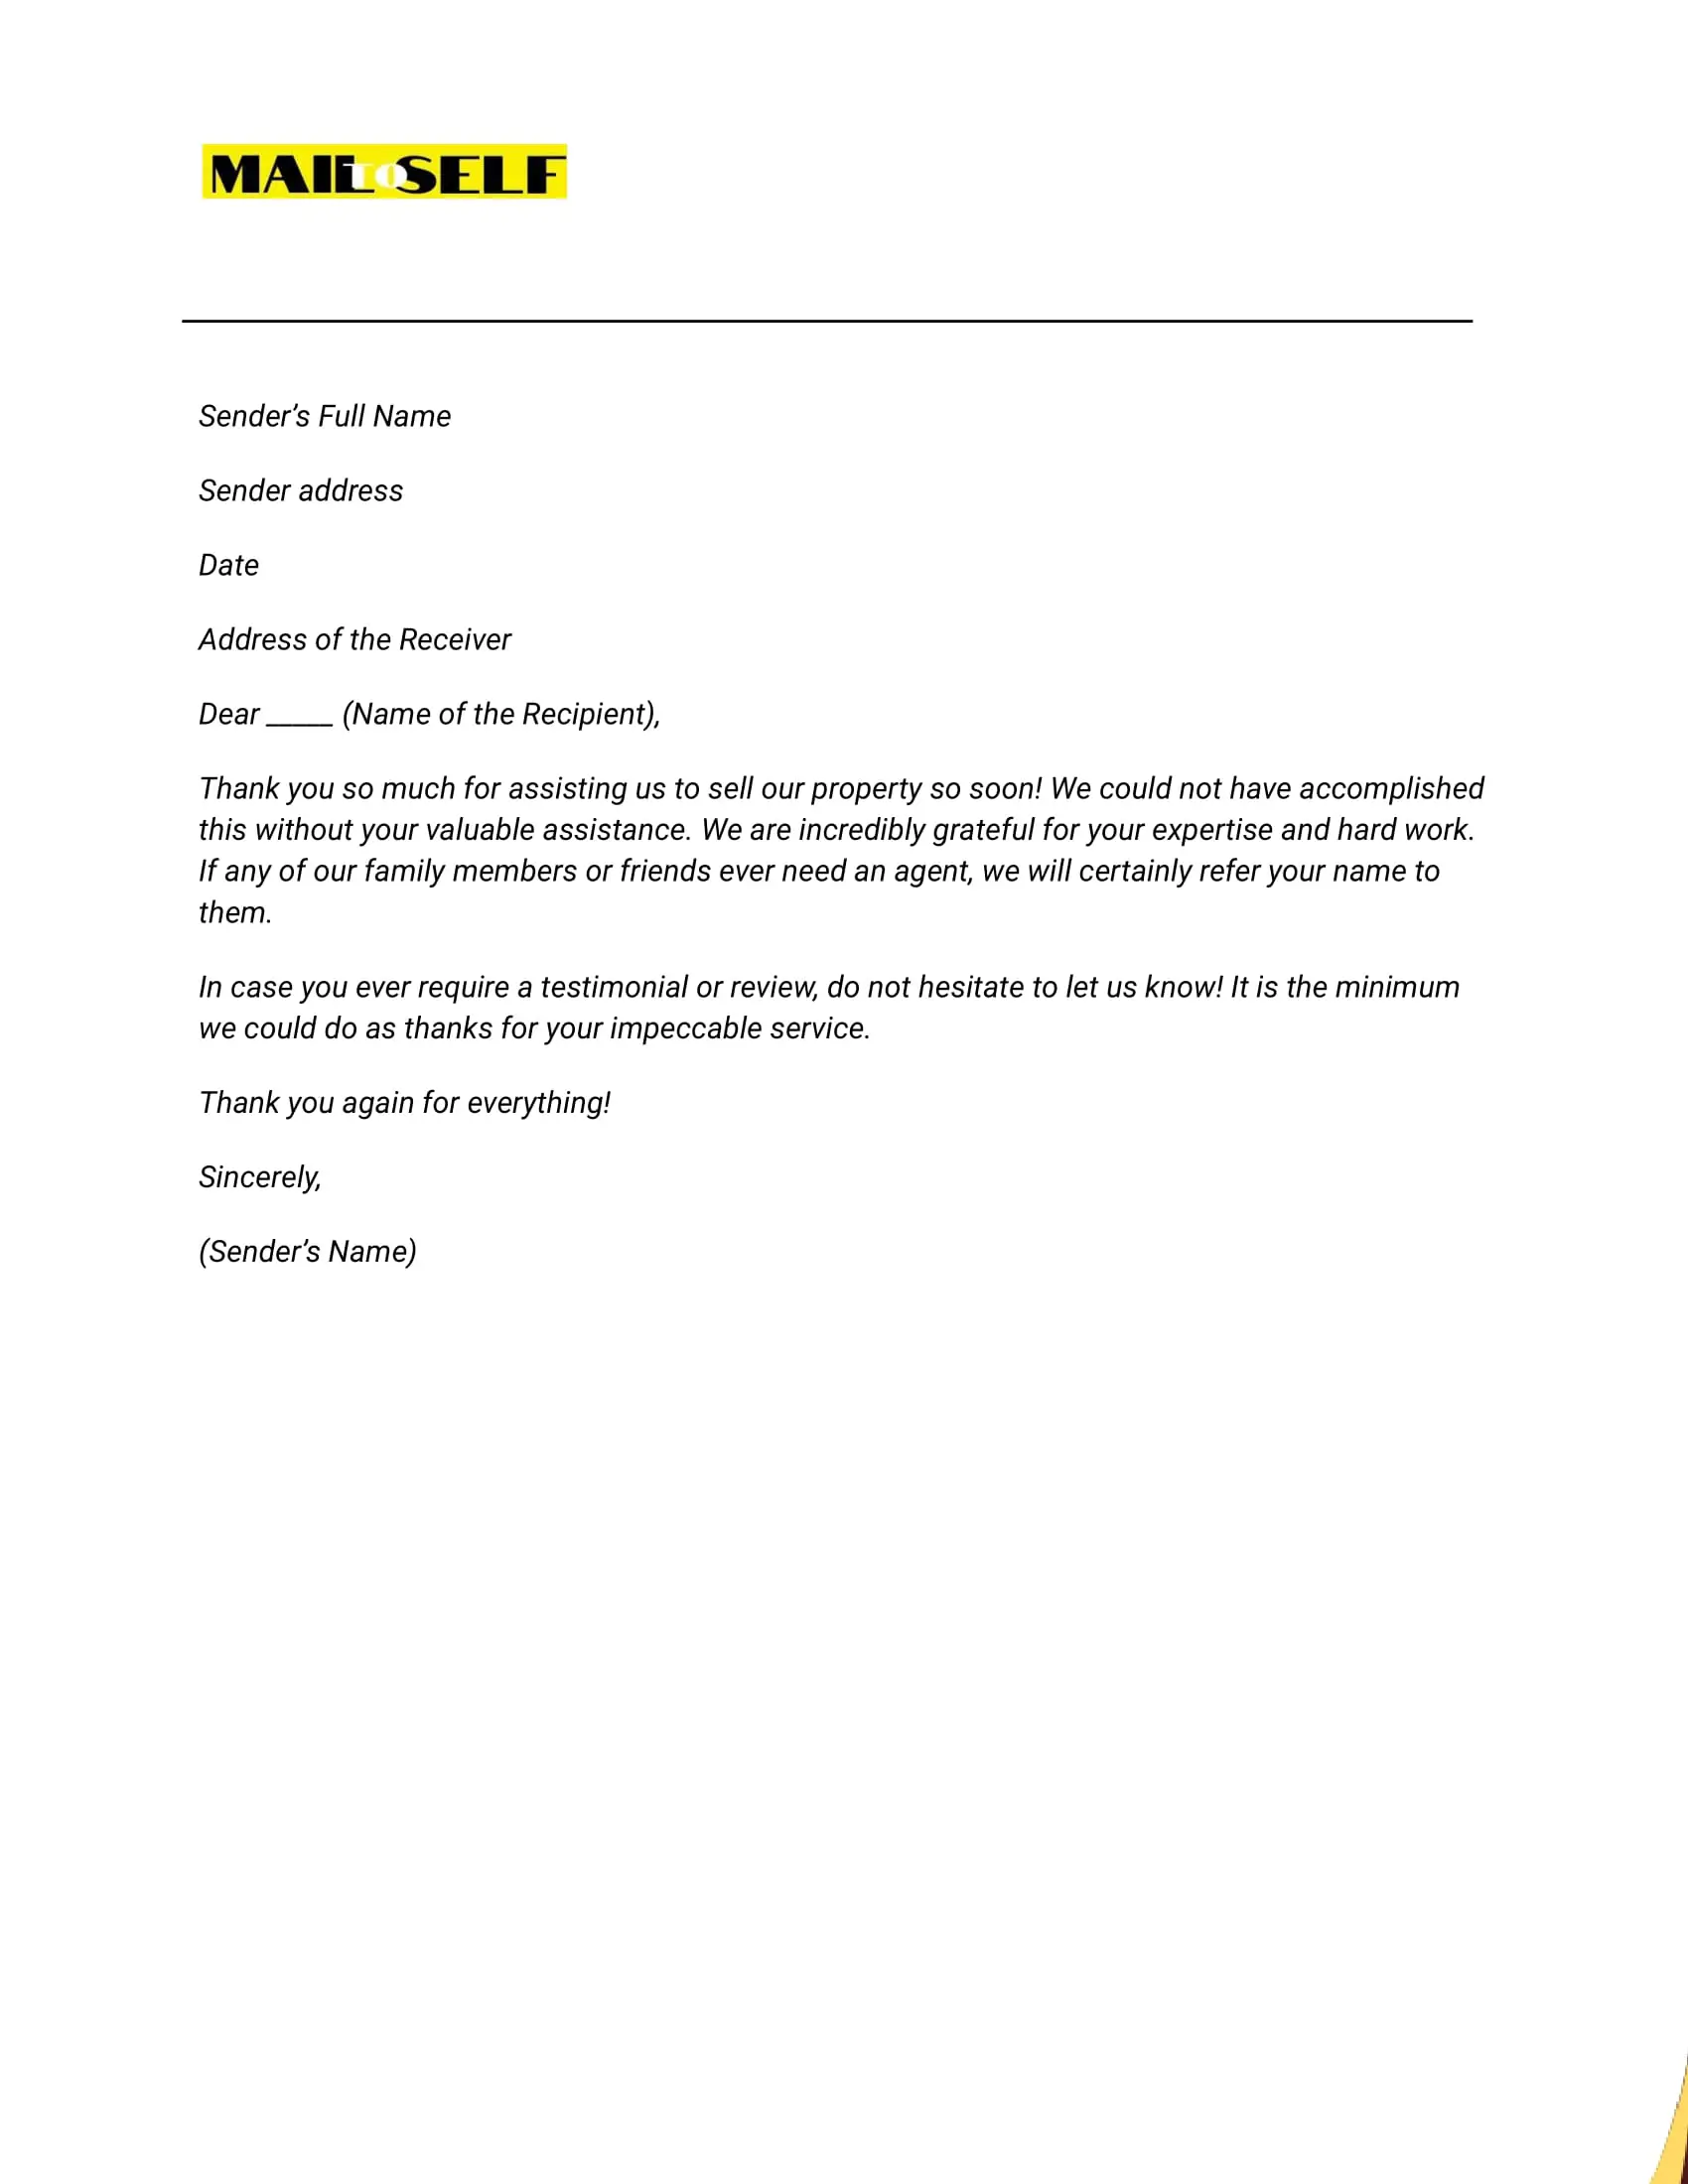 Sample #3 Thank You Letter to Real Estate Agent